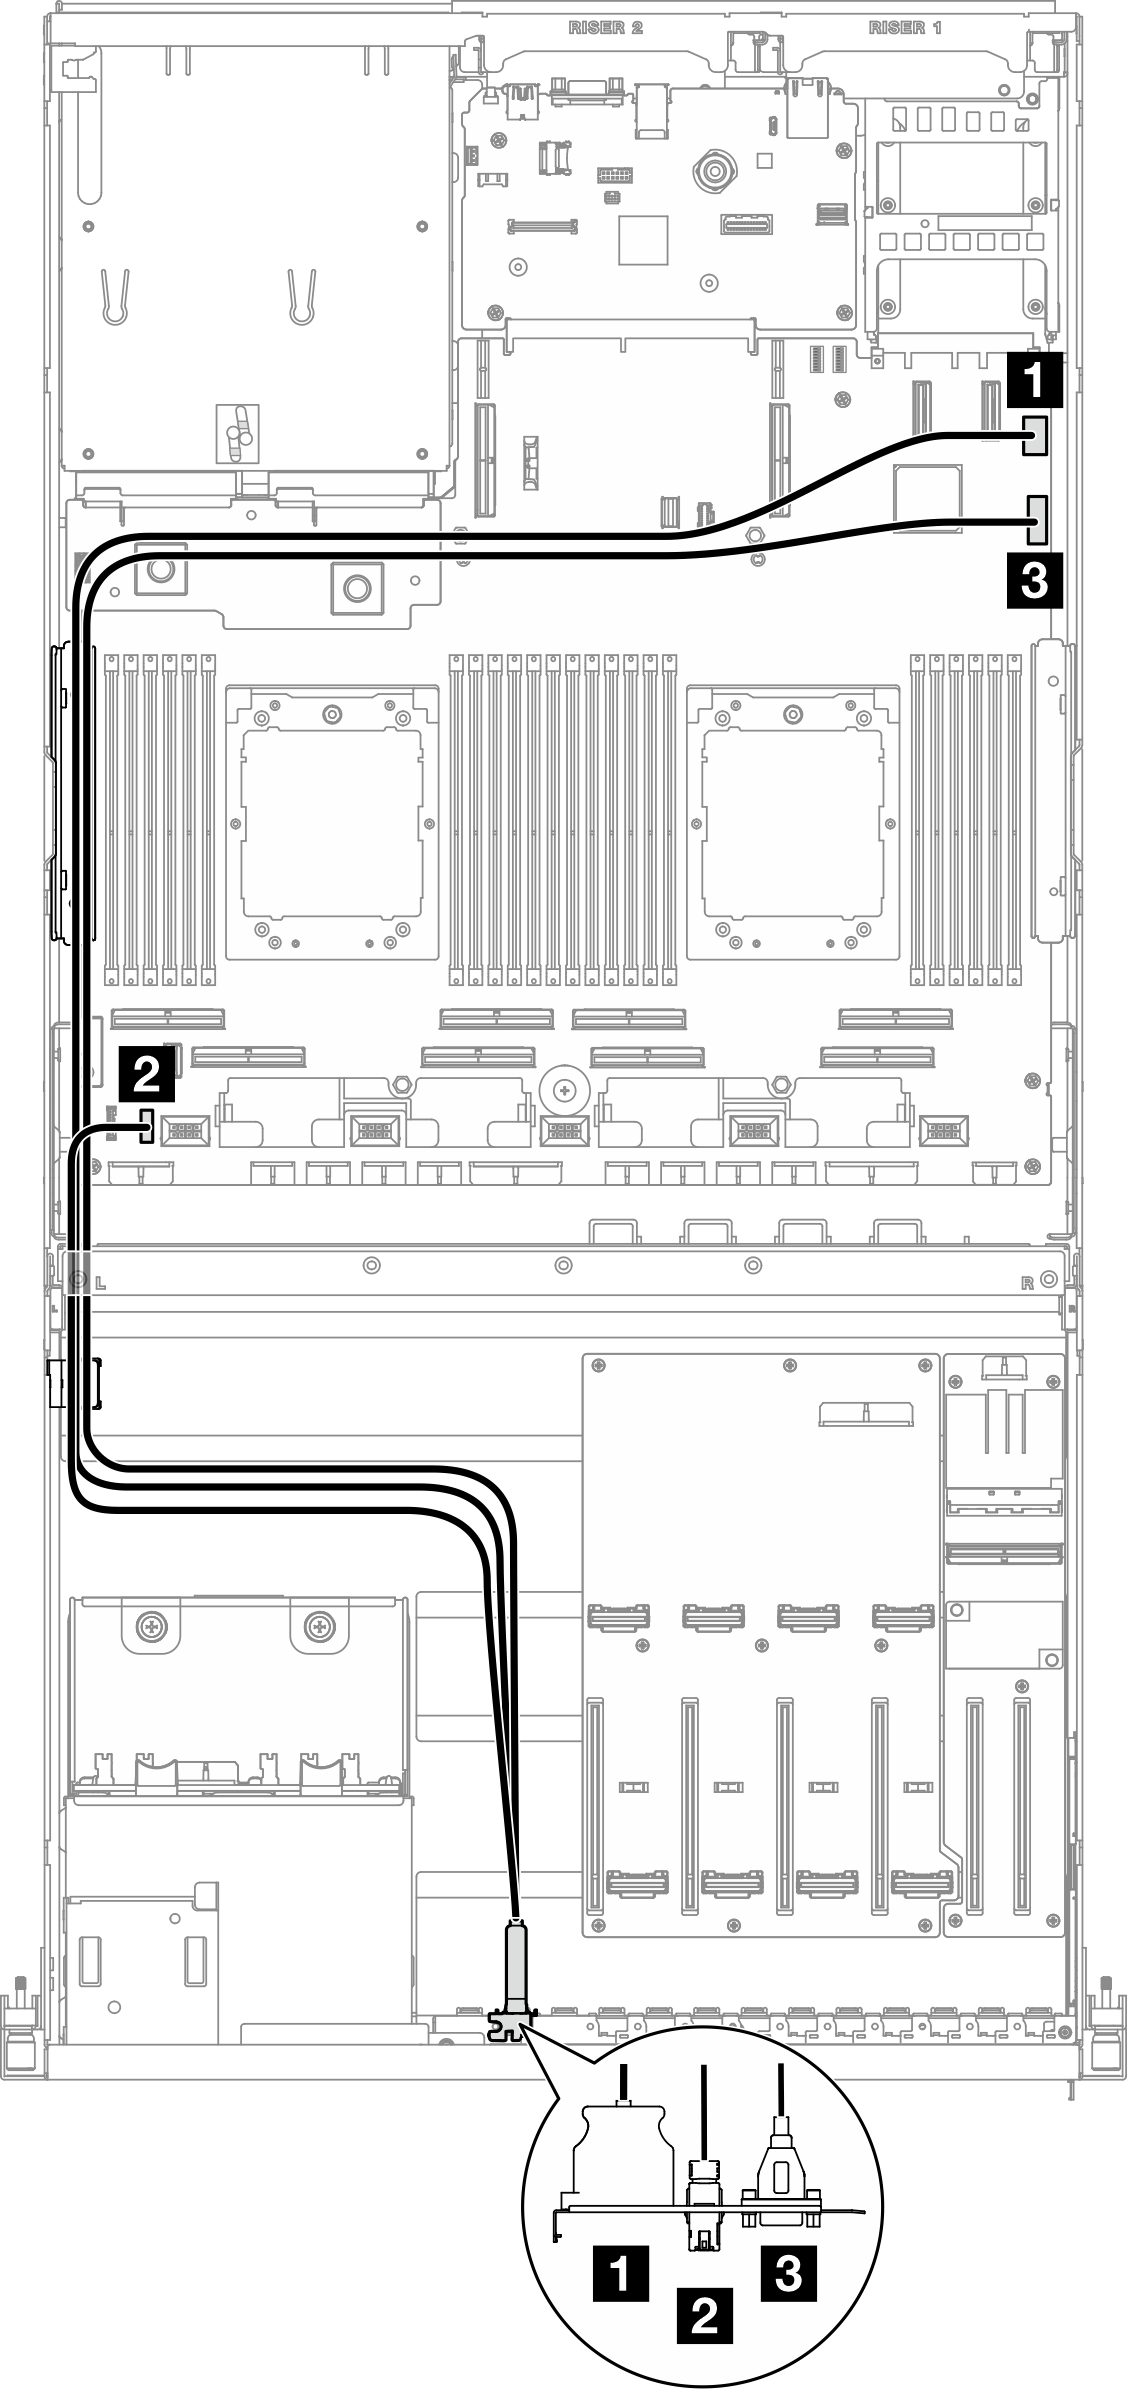 Cable routing for the front I/O module — 4-DW GPU-Modell